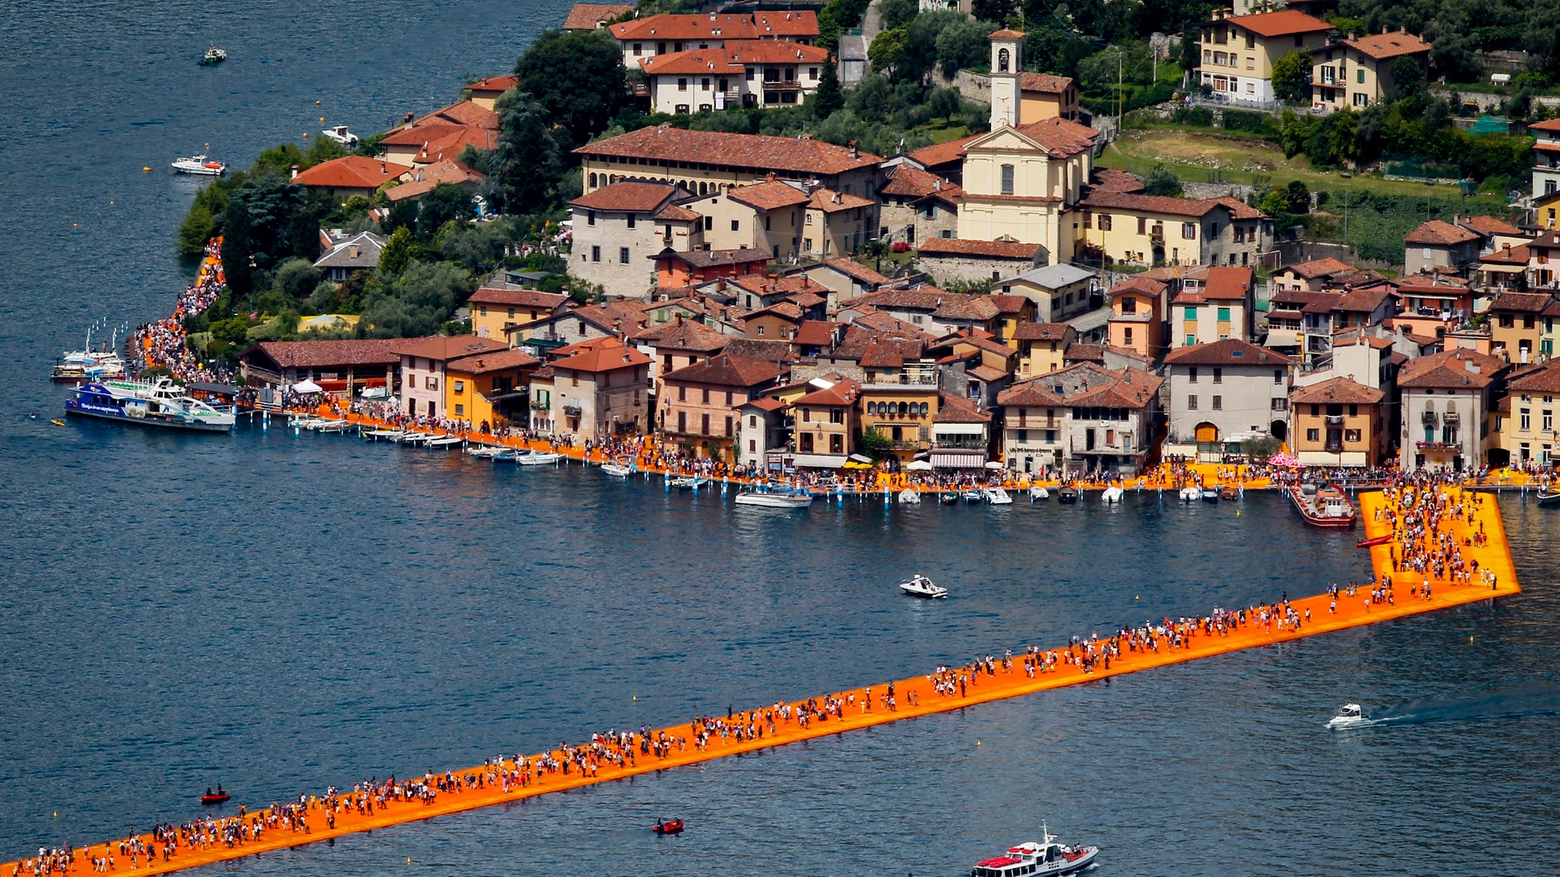 The Floating Piers, veduta dall'alto